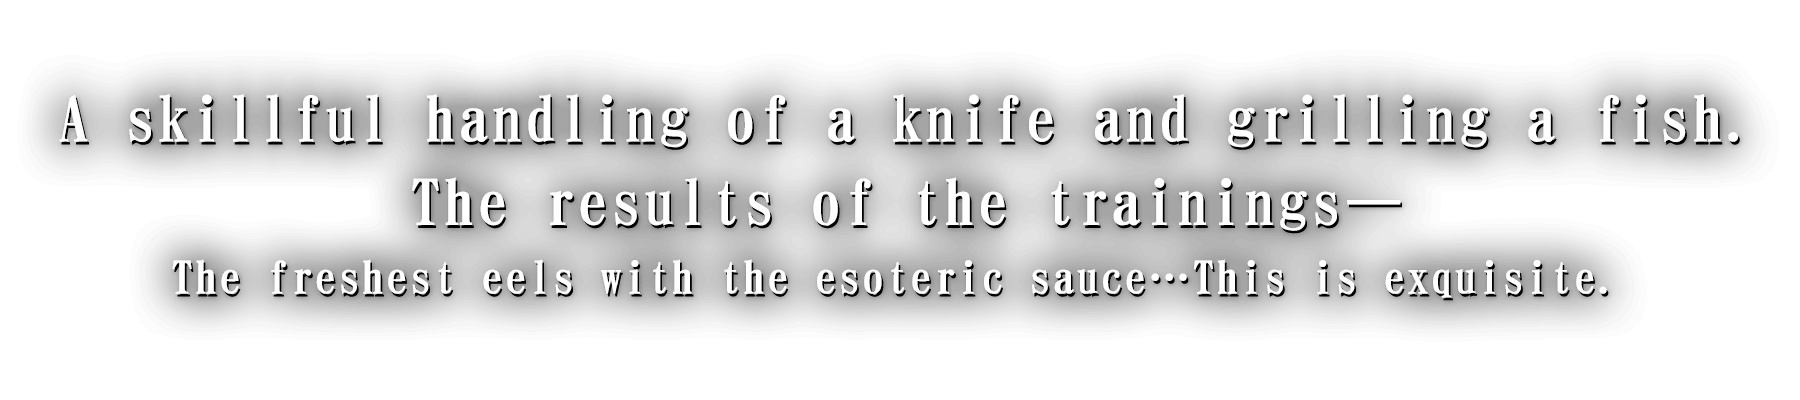 A skillful handling of a knife and grilling a fish. The results of the trainings—The freshest eels with the esoteric sauce…This is exquisite. 